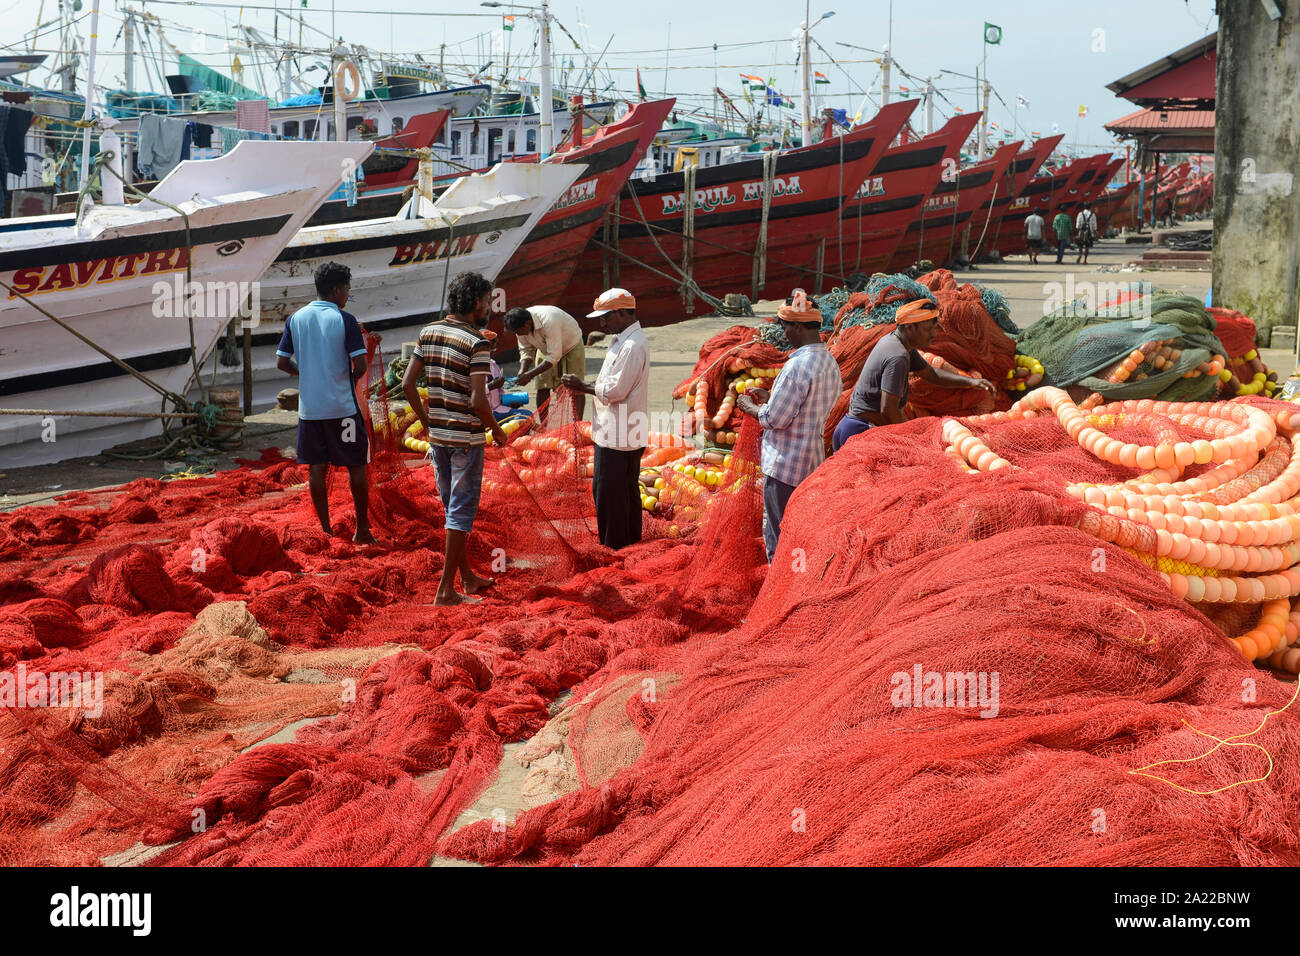 INDIA, Karnataka, Mangaluru, former name Mangalore, trawler in fishing port during monsoon, plastic fishing trawl nets and ropes which are a major source of plastic pollution of the oceans and dangerous for sea animals Stock Photo